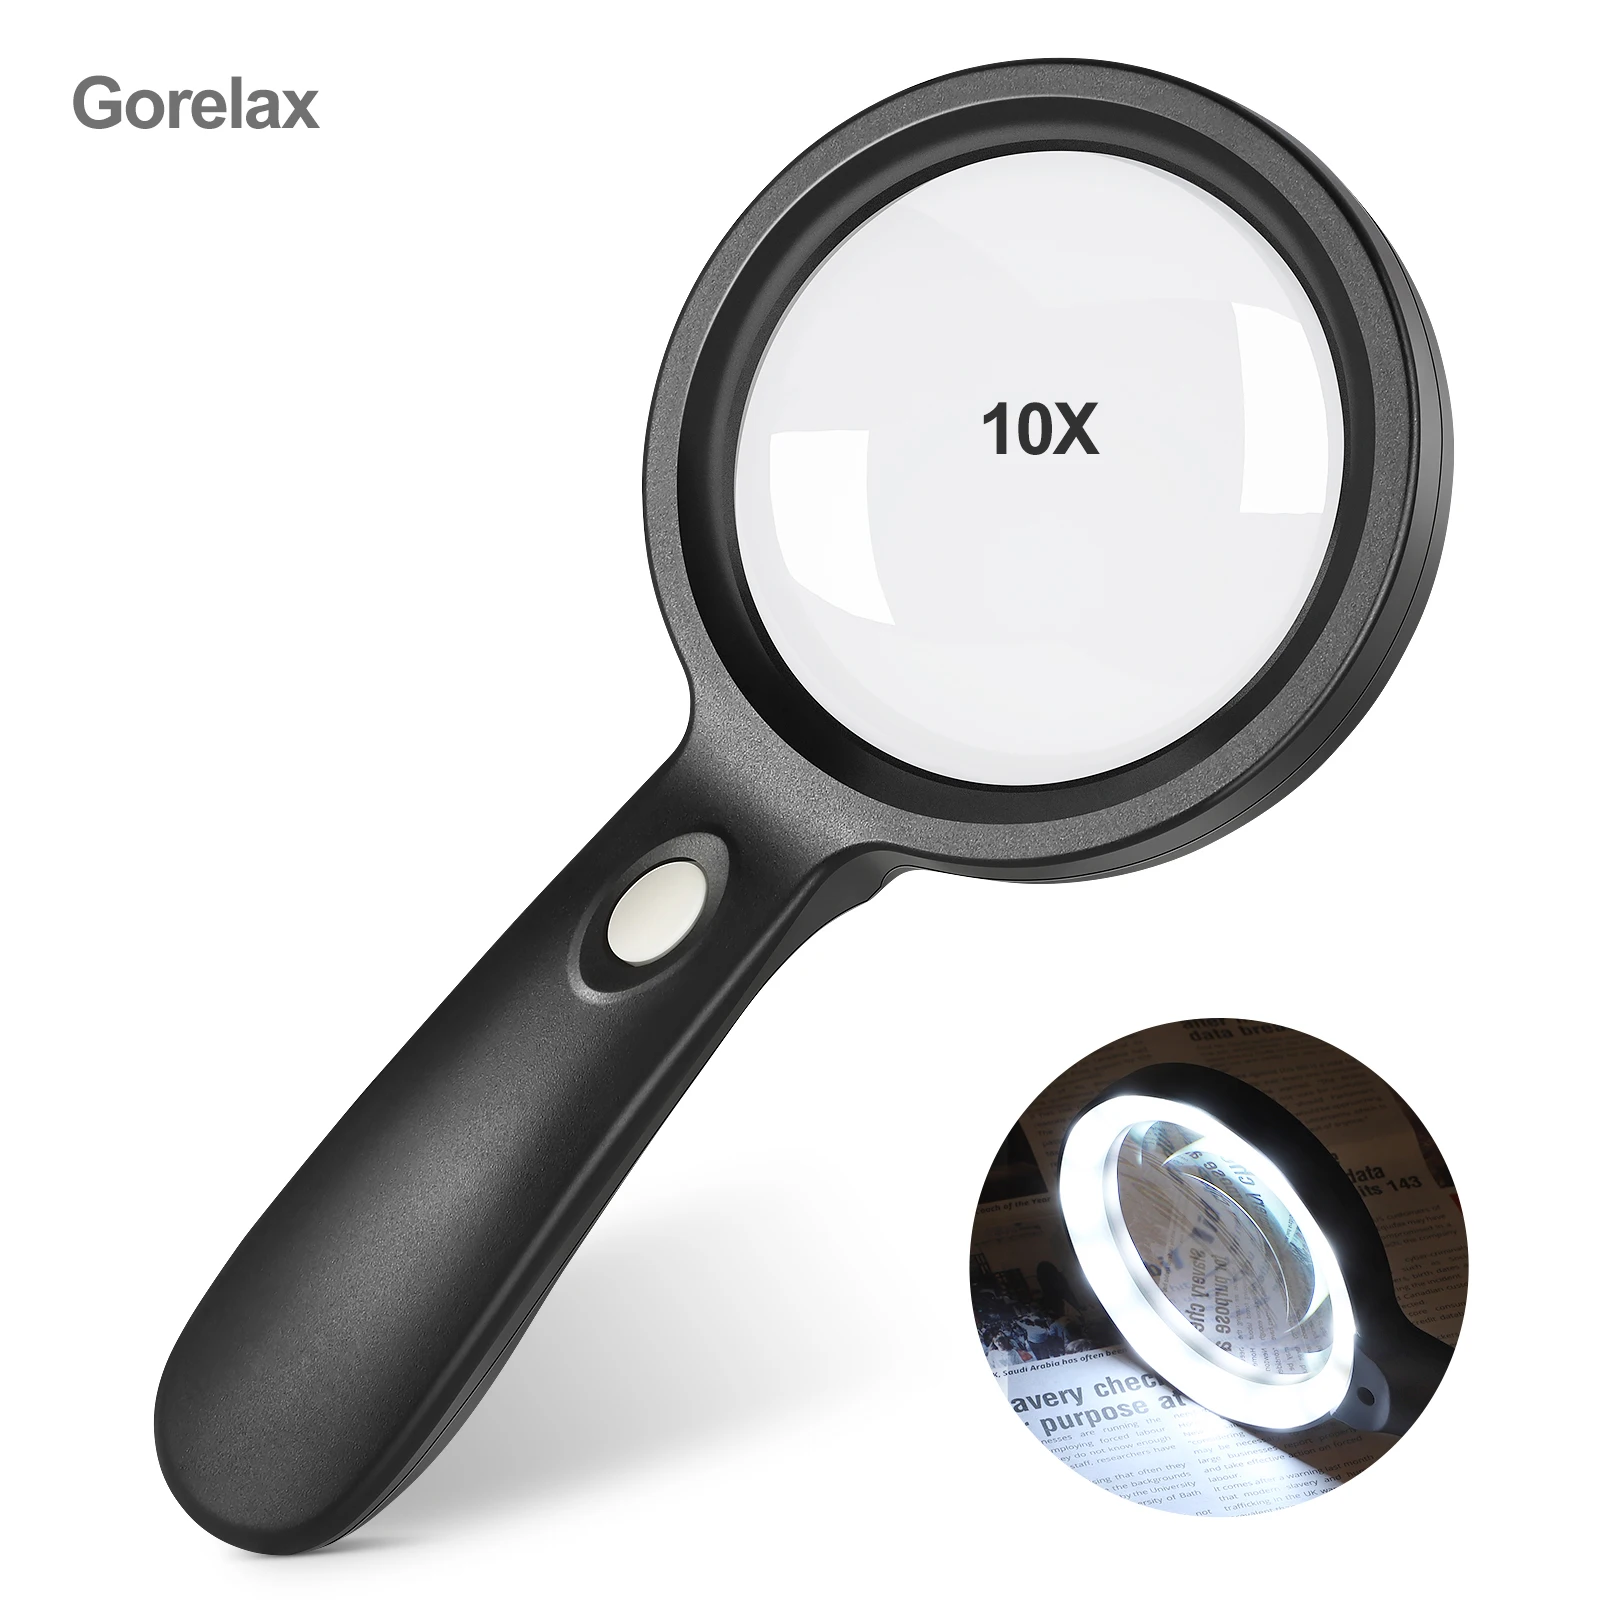 Clear Eyes Magnifying Glass Reading Jewelry Loupe Eye Magnifier Handheld With LED Light UK 